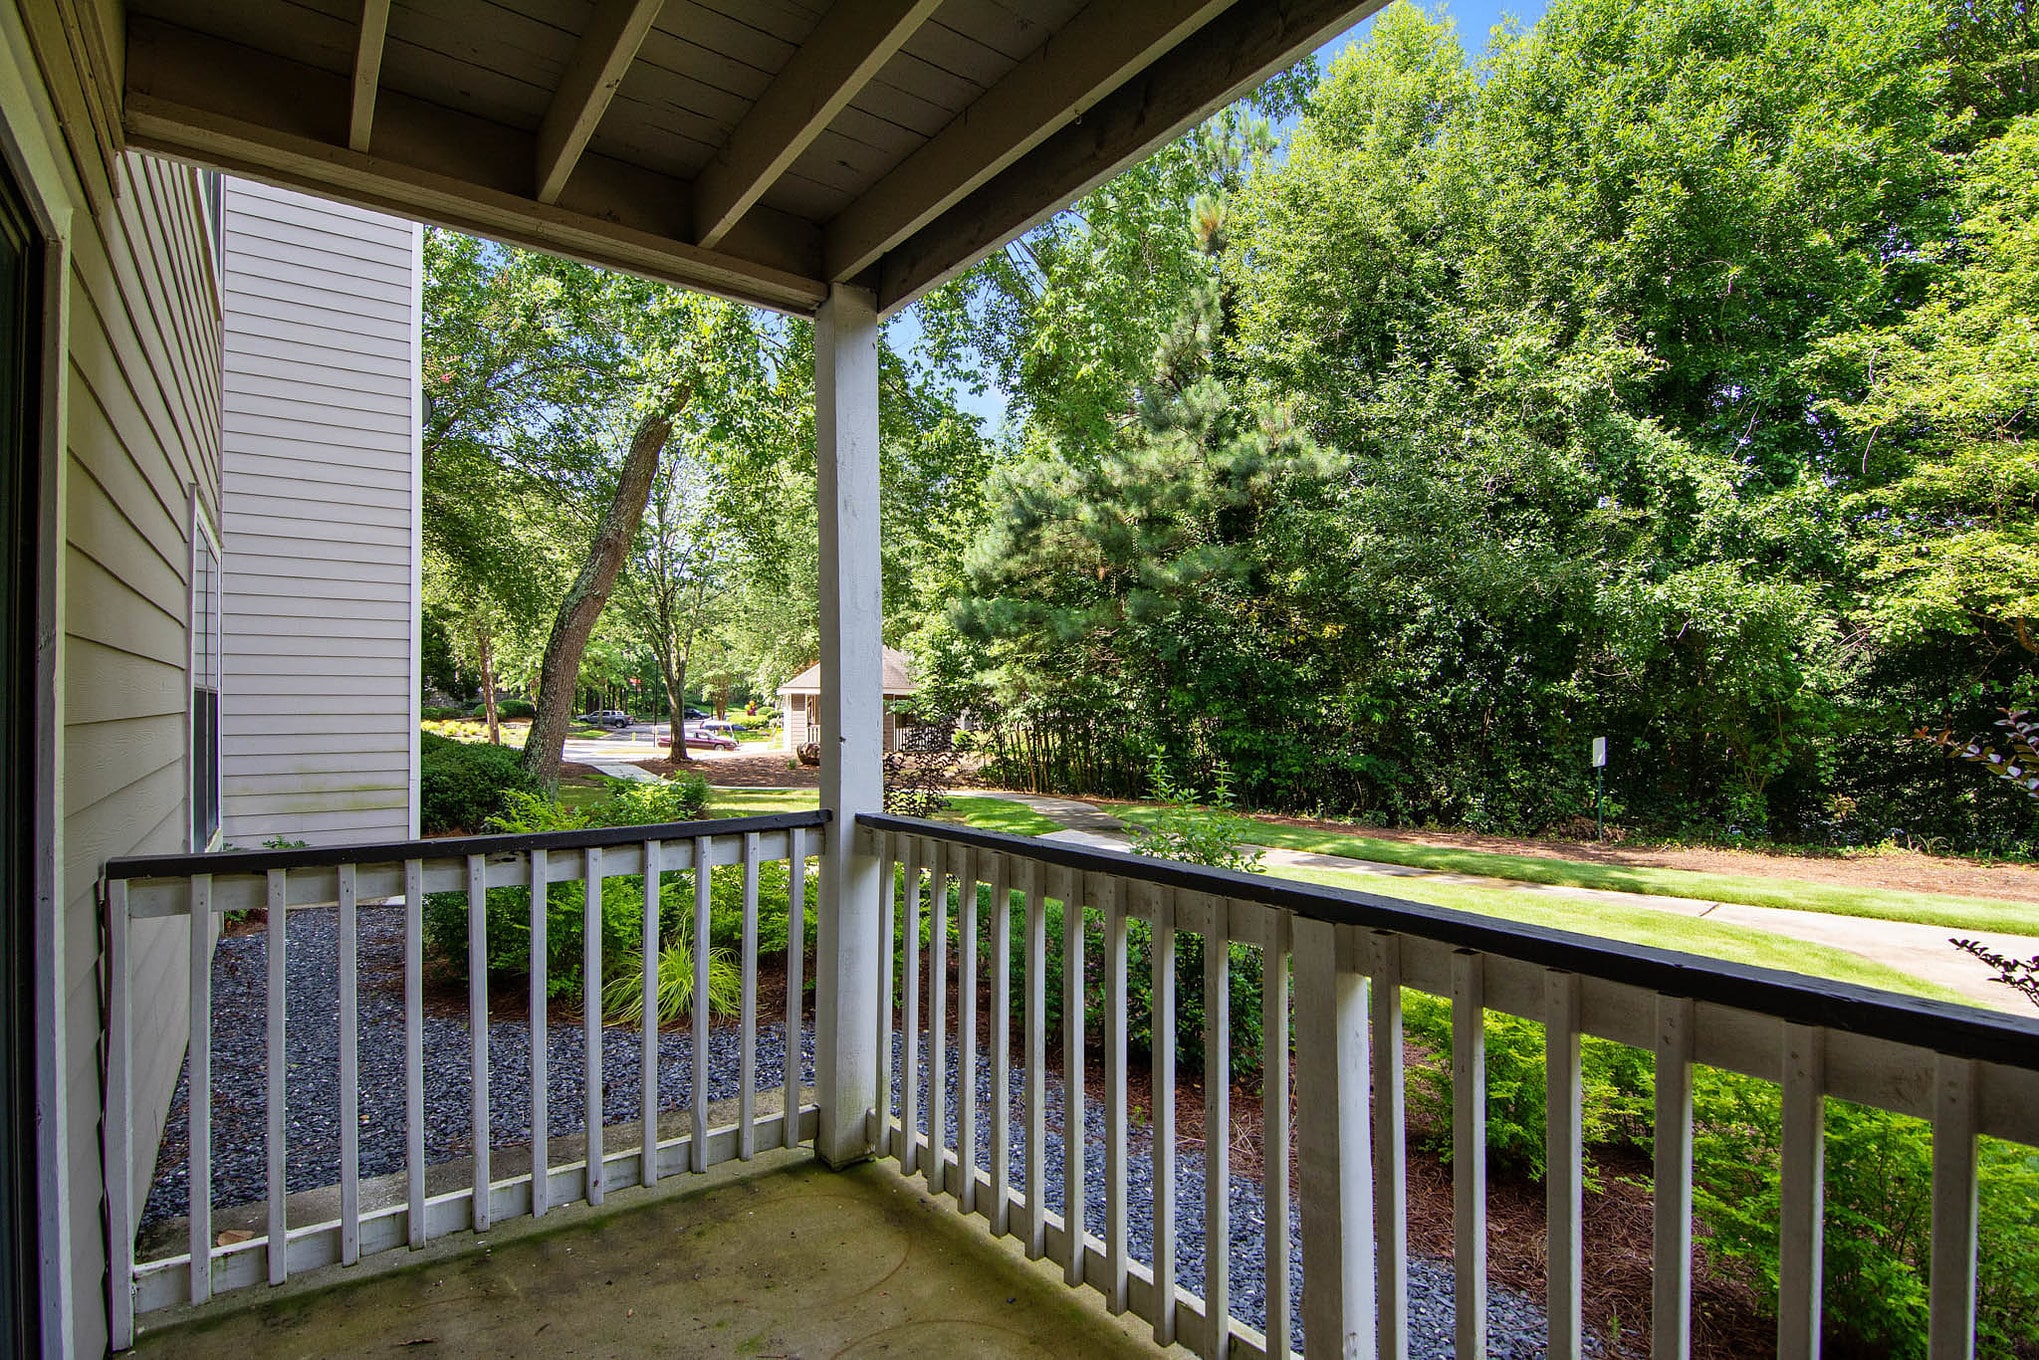 Grove Parkview Apartments in Stone Mountain A Two Bedroom Apartment with a balcony offering a view of a wooded area.